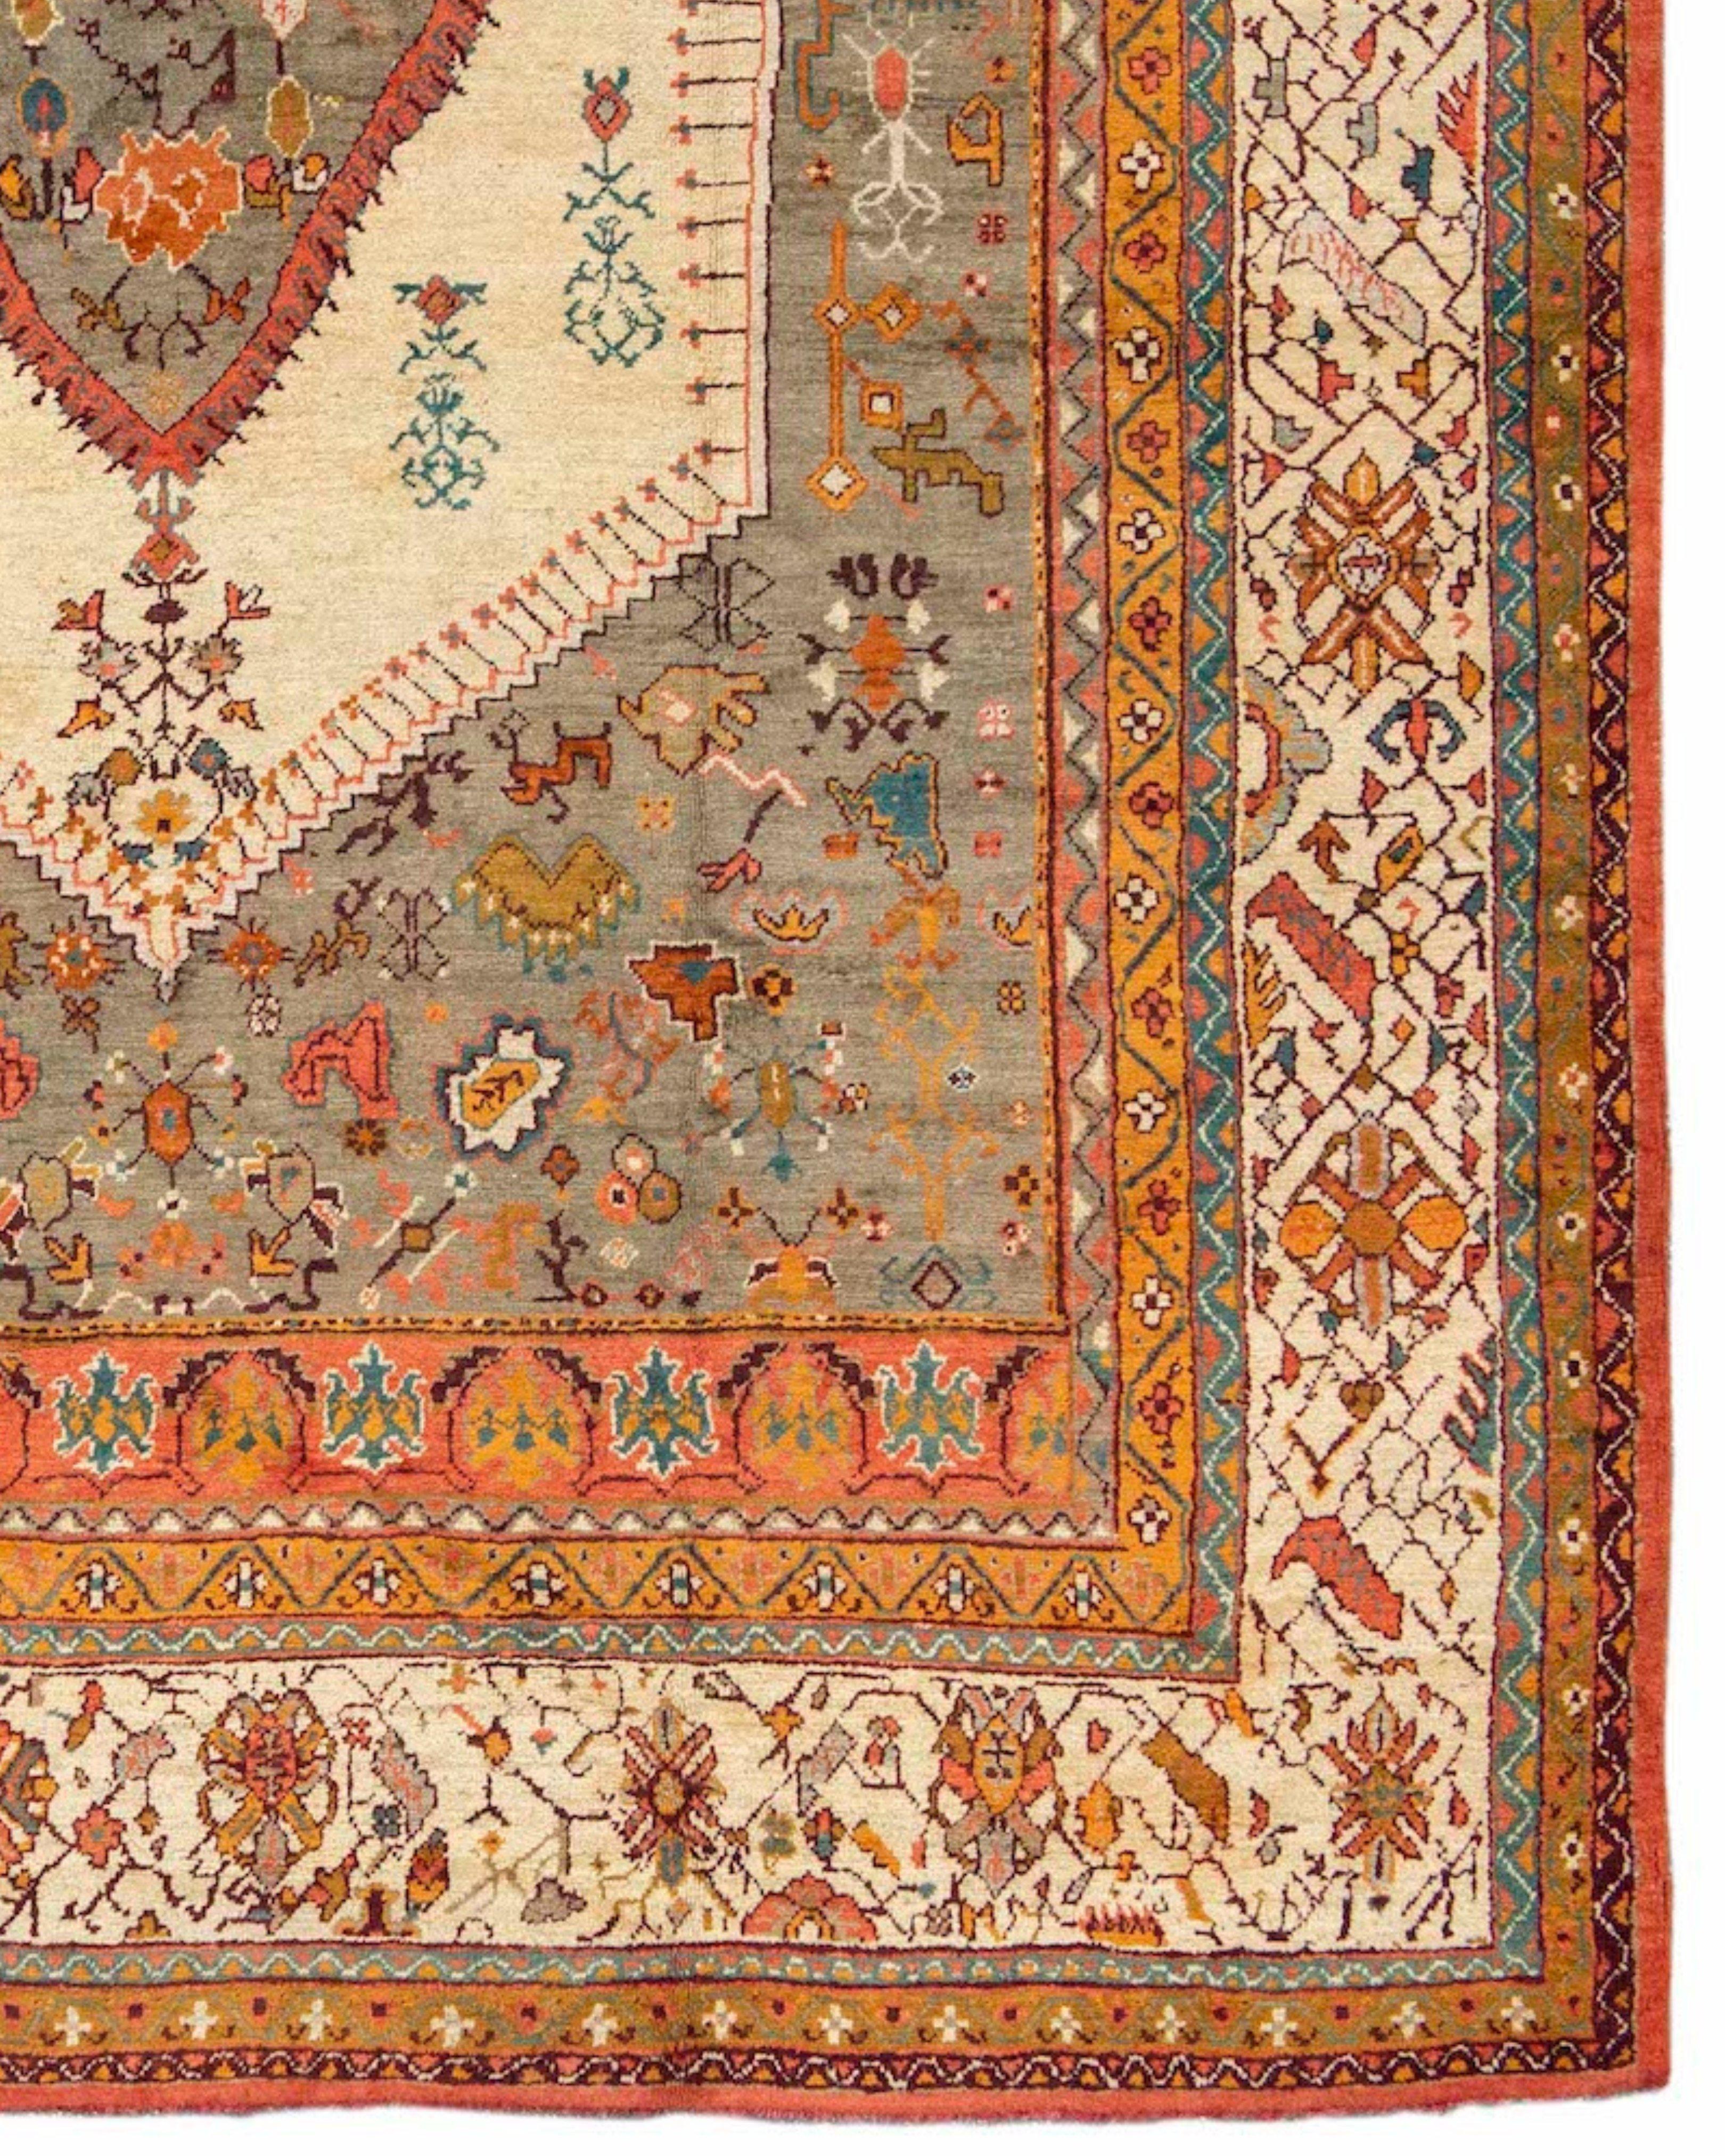 Antique Anatolian Oushak Rug, 19th Century

This pleasing Turkish Oushak carpet paints a rustic rendition of a classic medallion format. Soft wool is complemented by soft color using prominent creams and beige with accents in gold and coral.